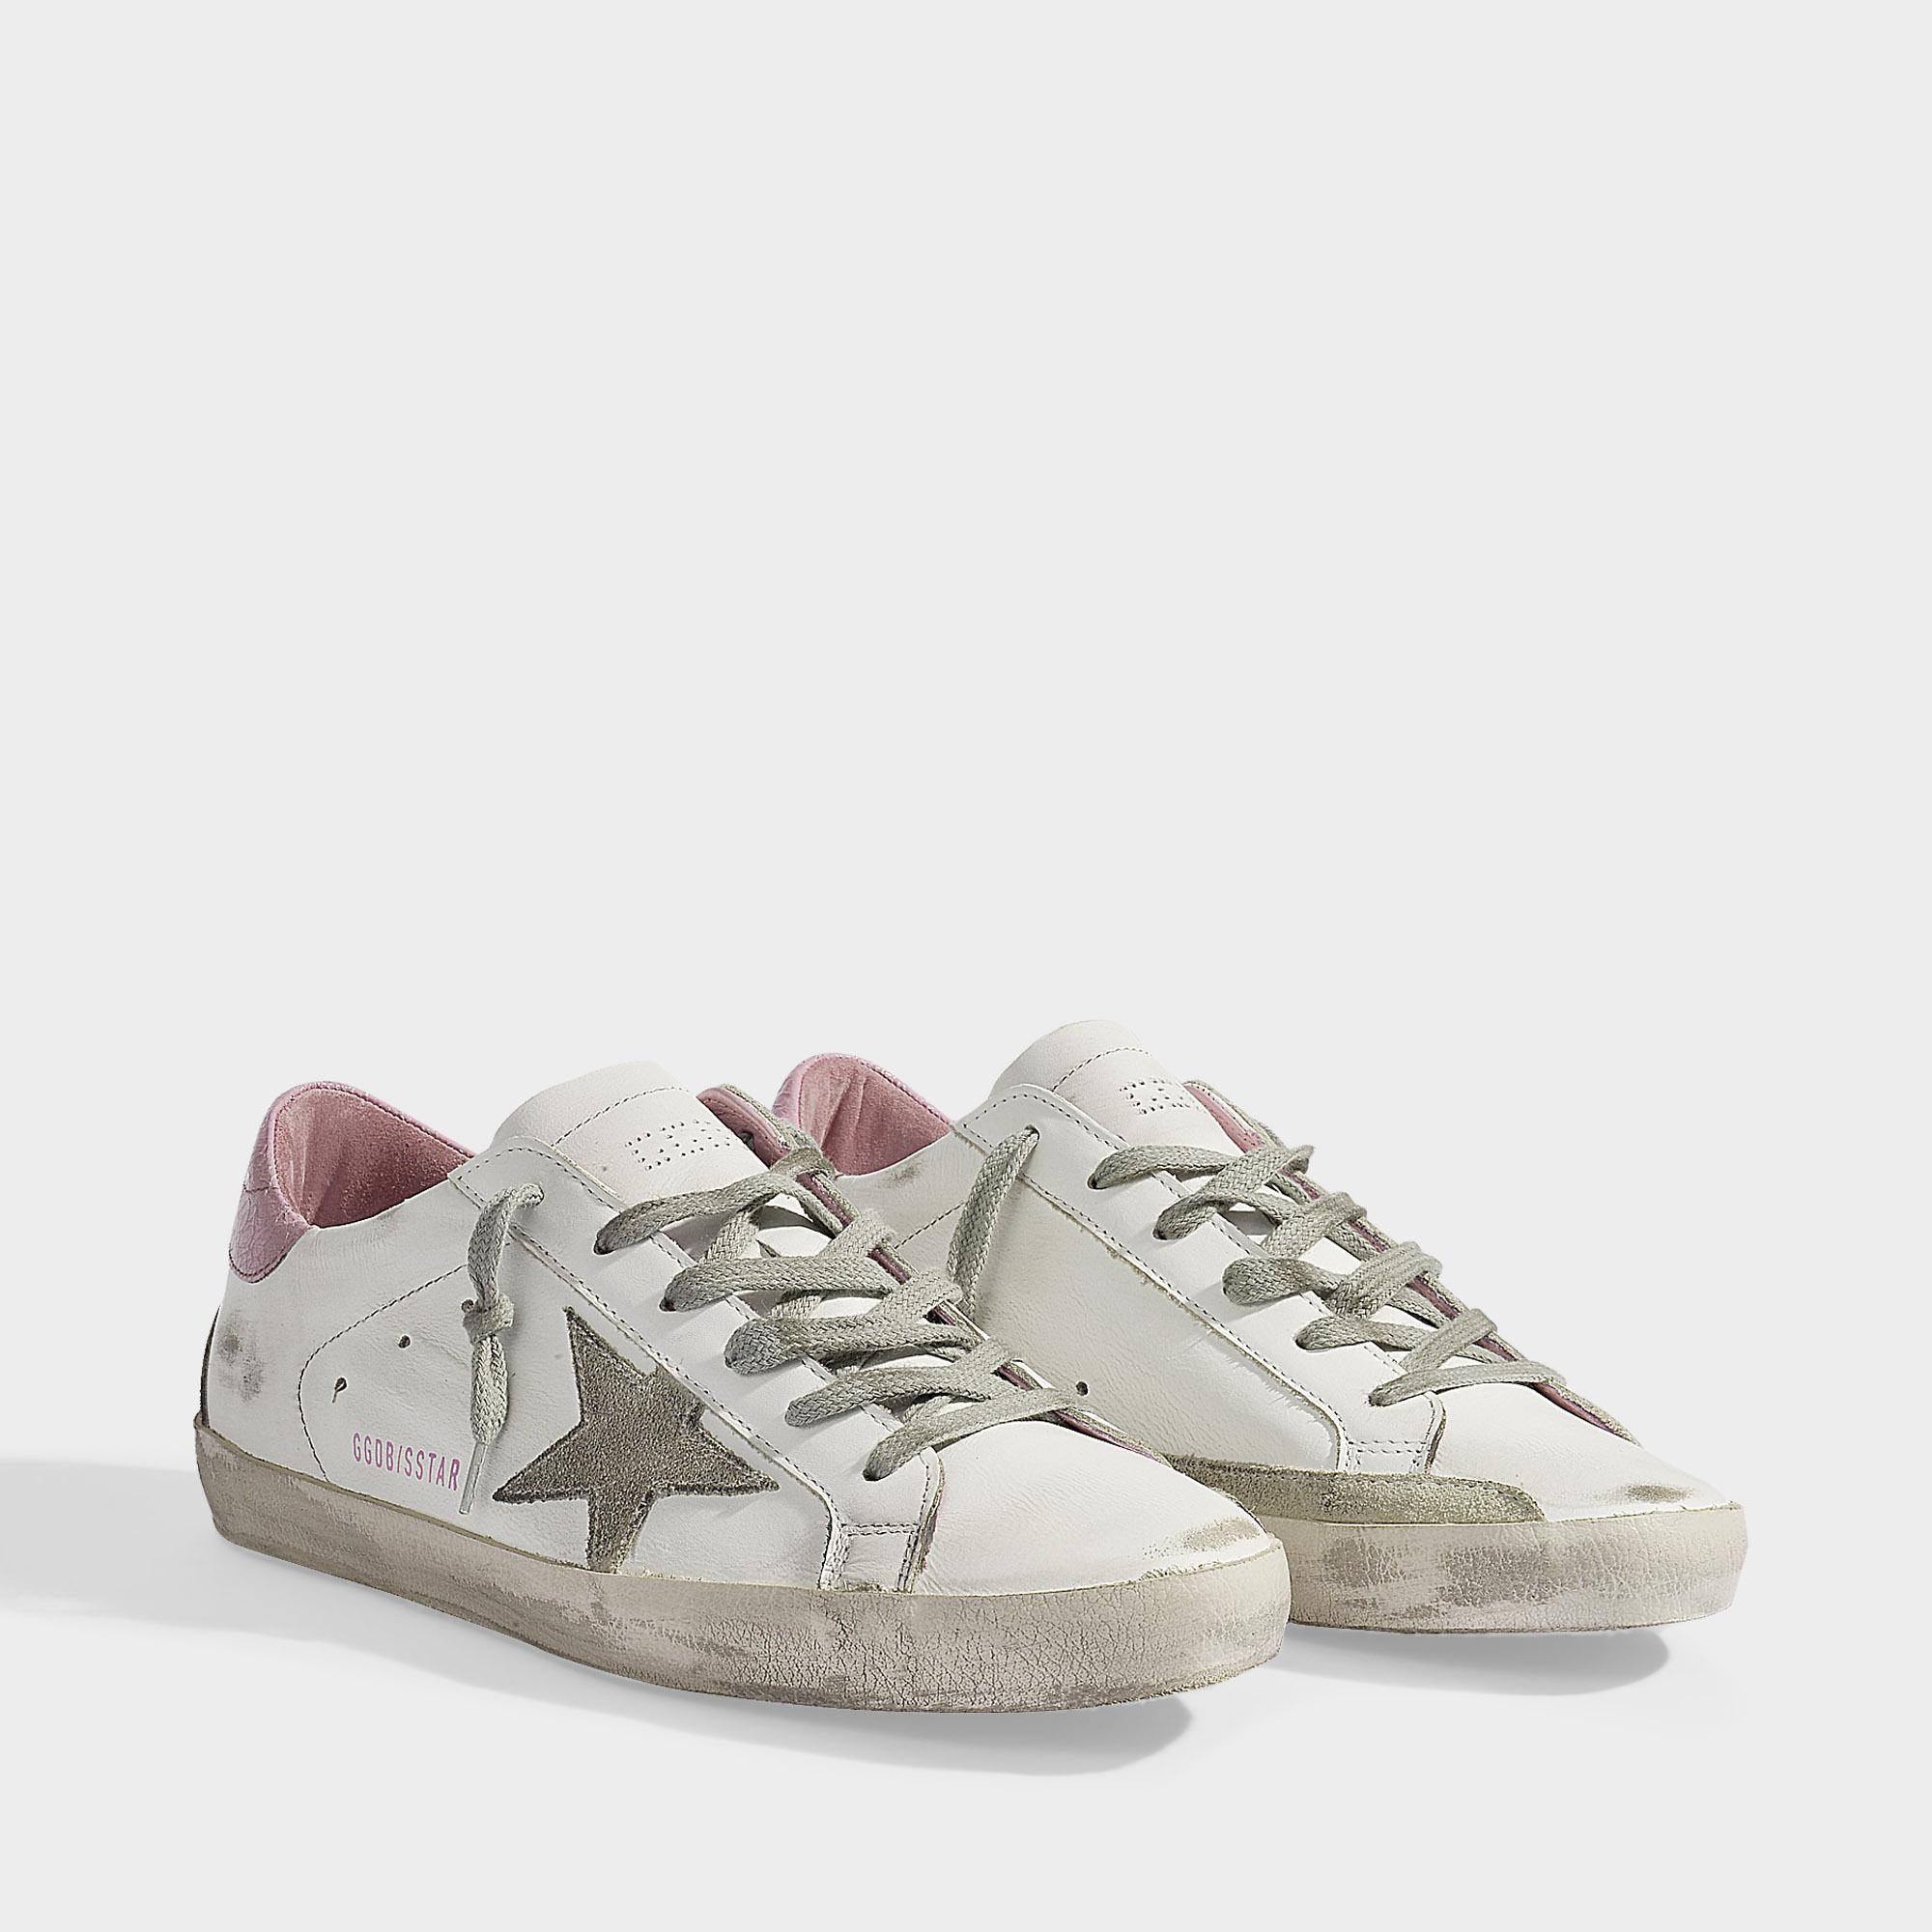 Golden Goose Superstar Sneakers In White And Baby Pink Leather | Lyst